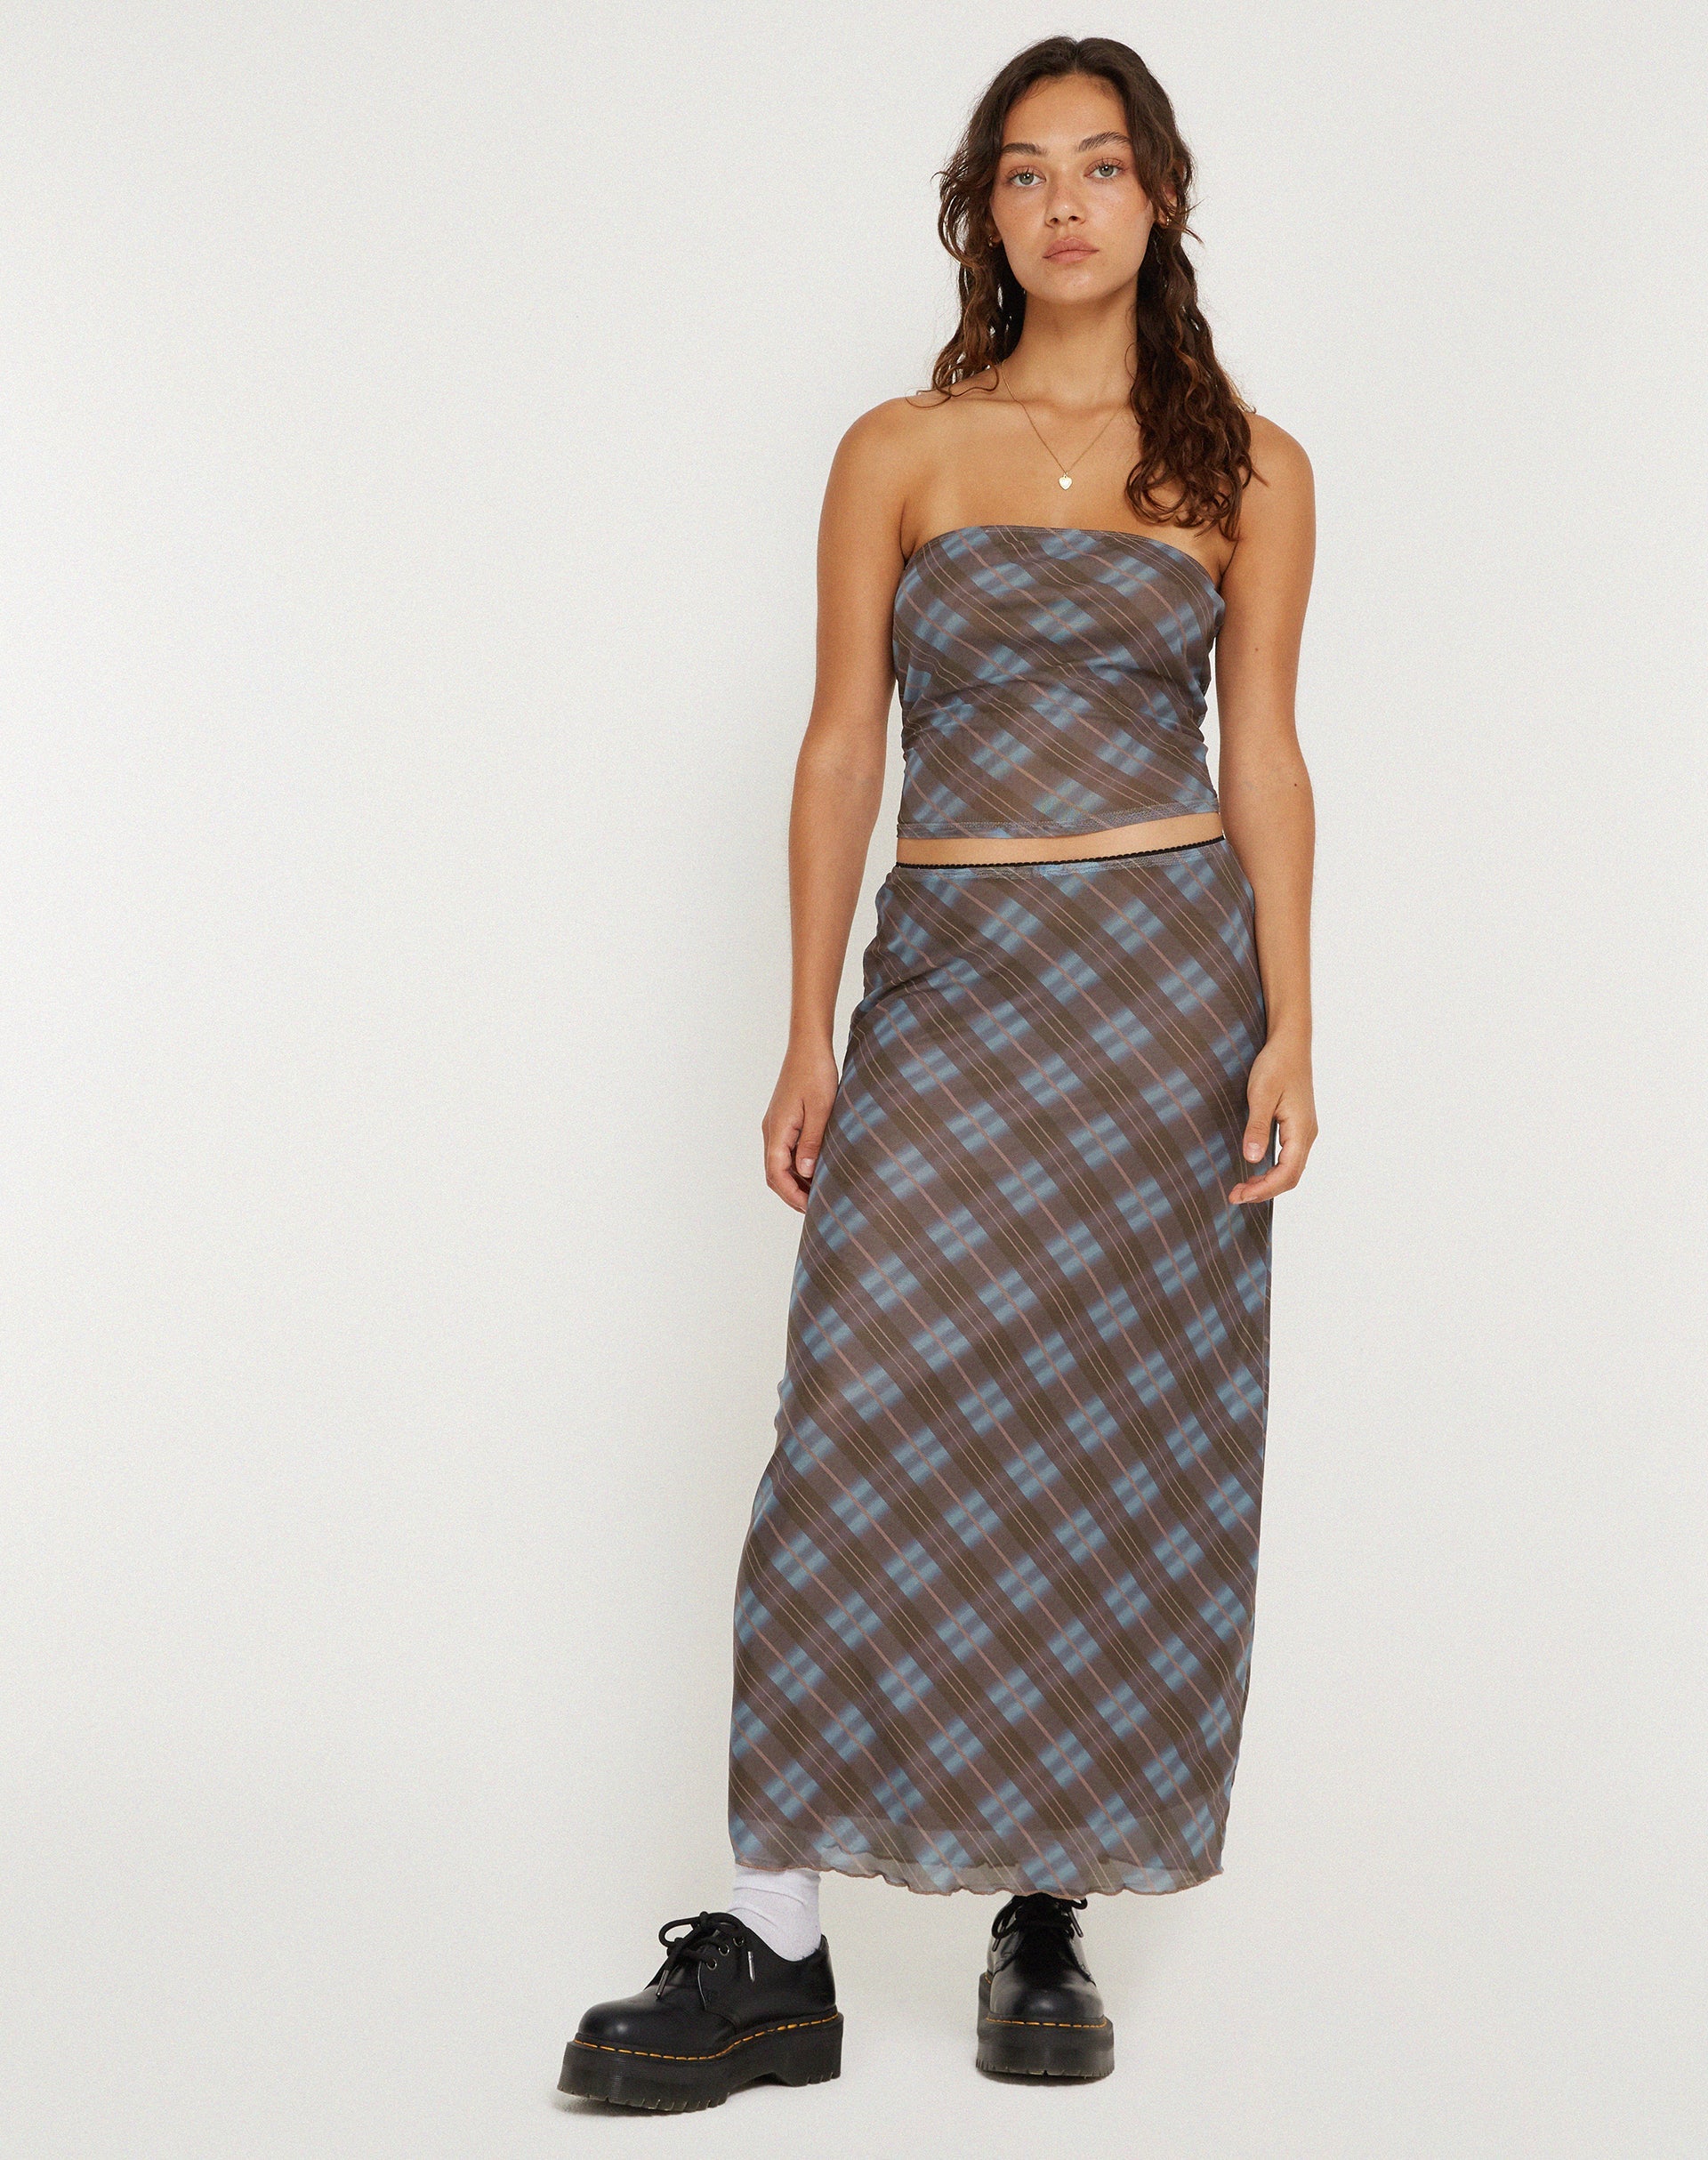 Skirt with a check pattern - olive